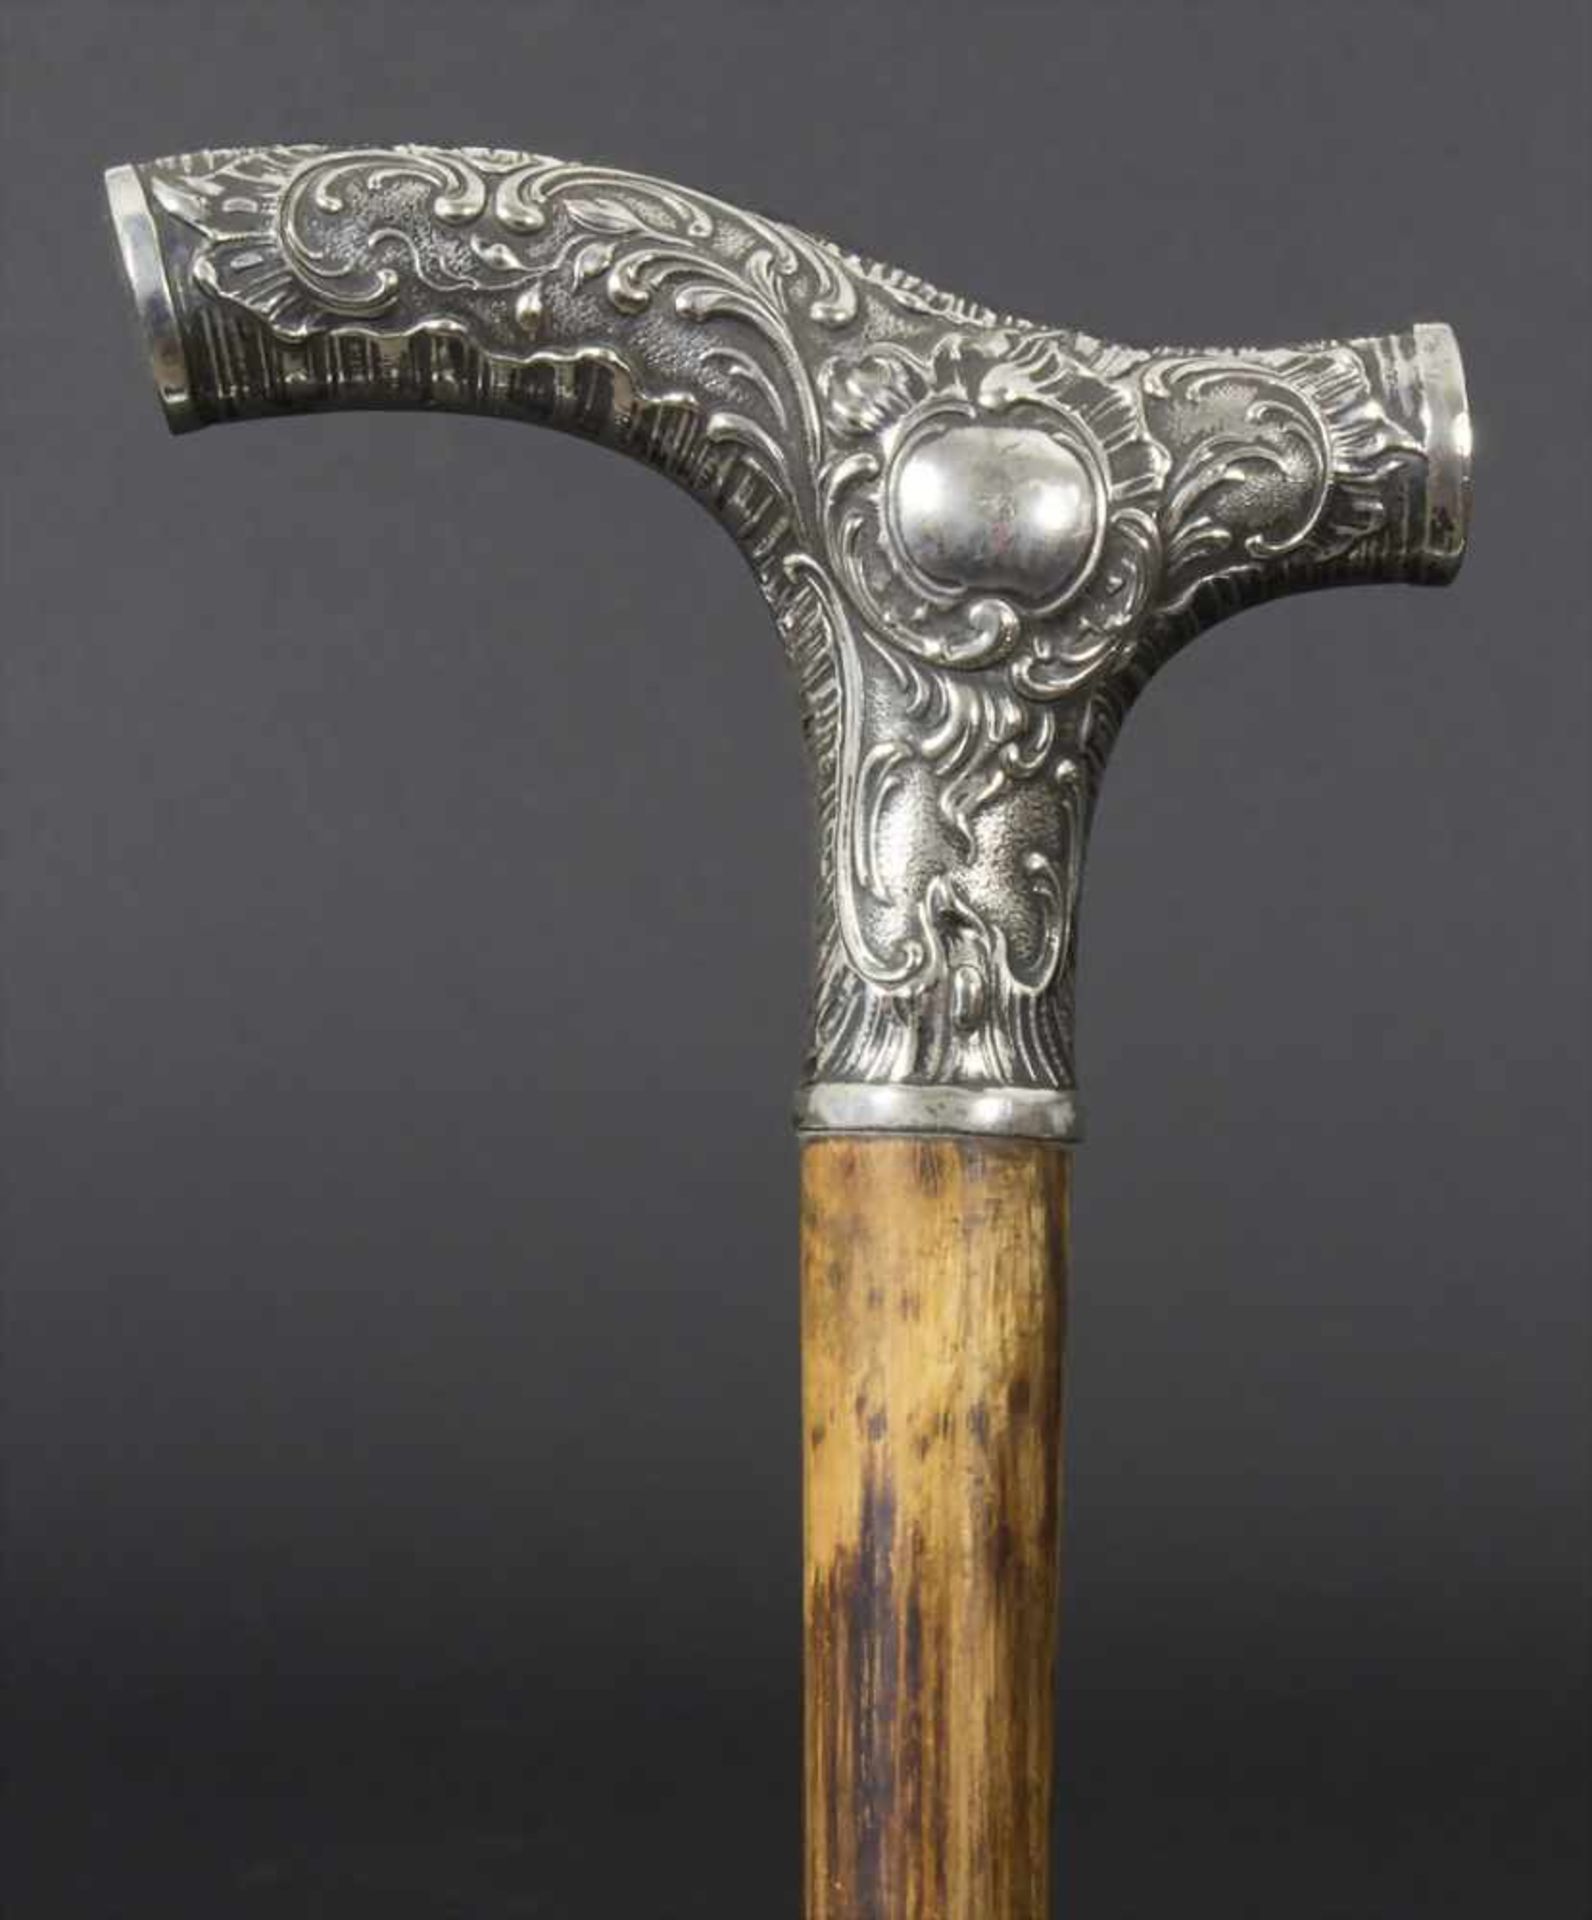 Gehstock mit Silbergriff 'Rocaille' / A silver handle 'Rocaille', Ende 19. Jh.Material: Silber,